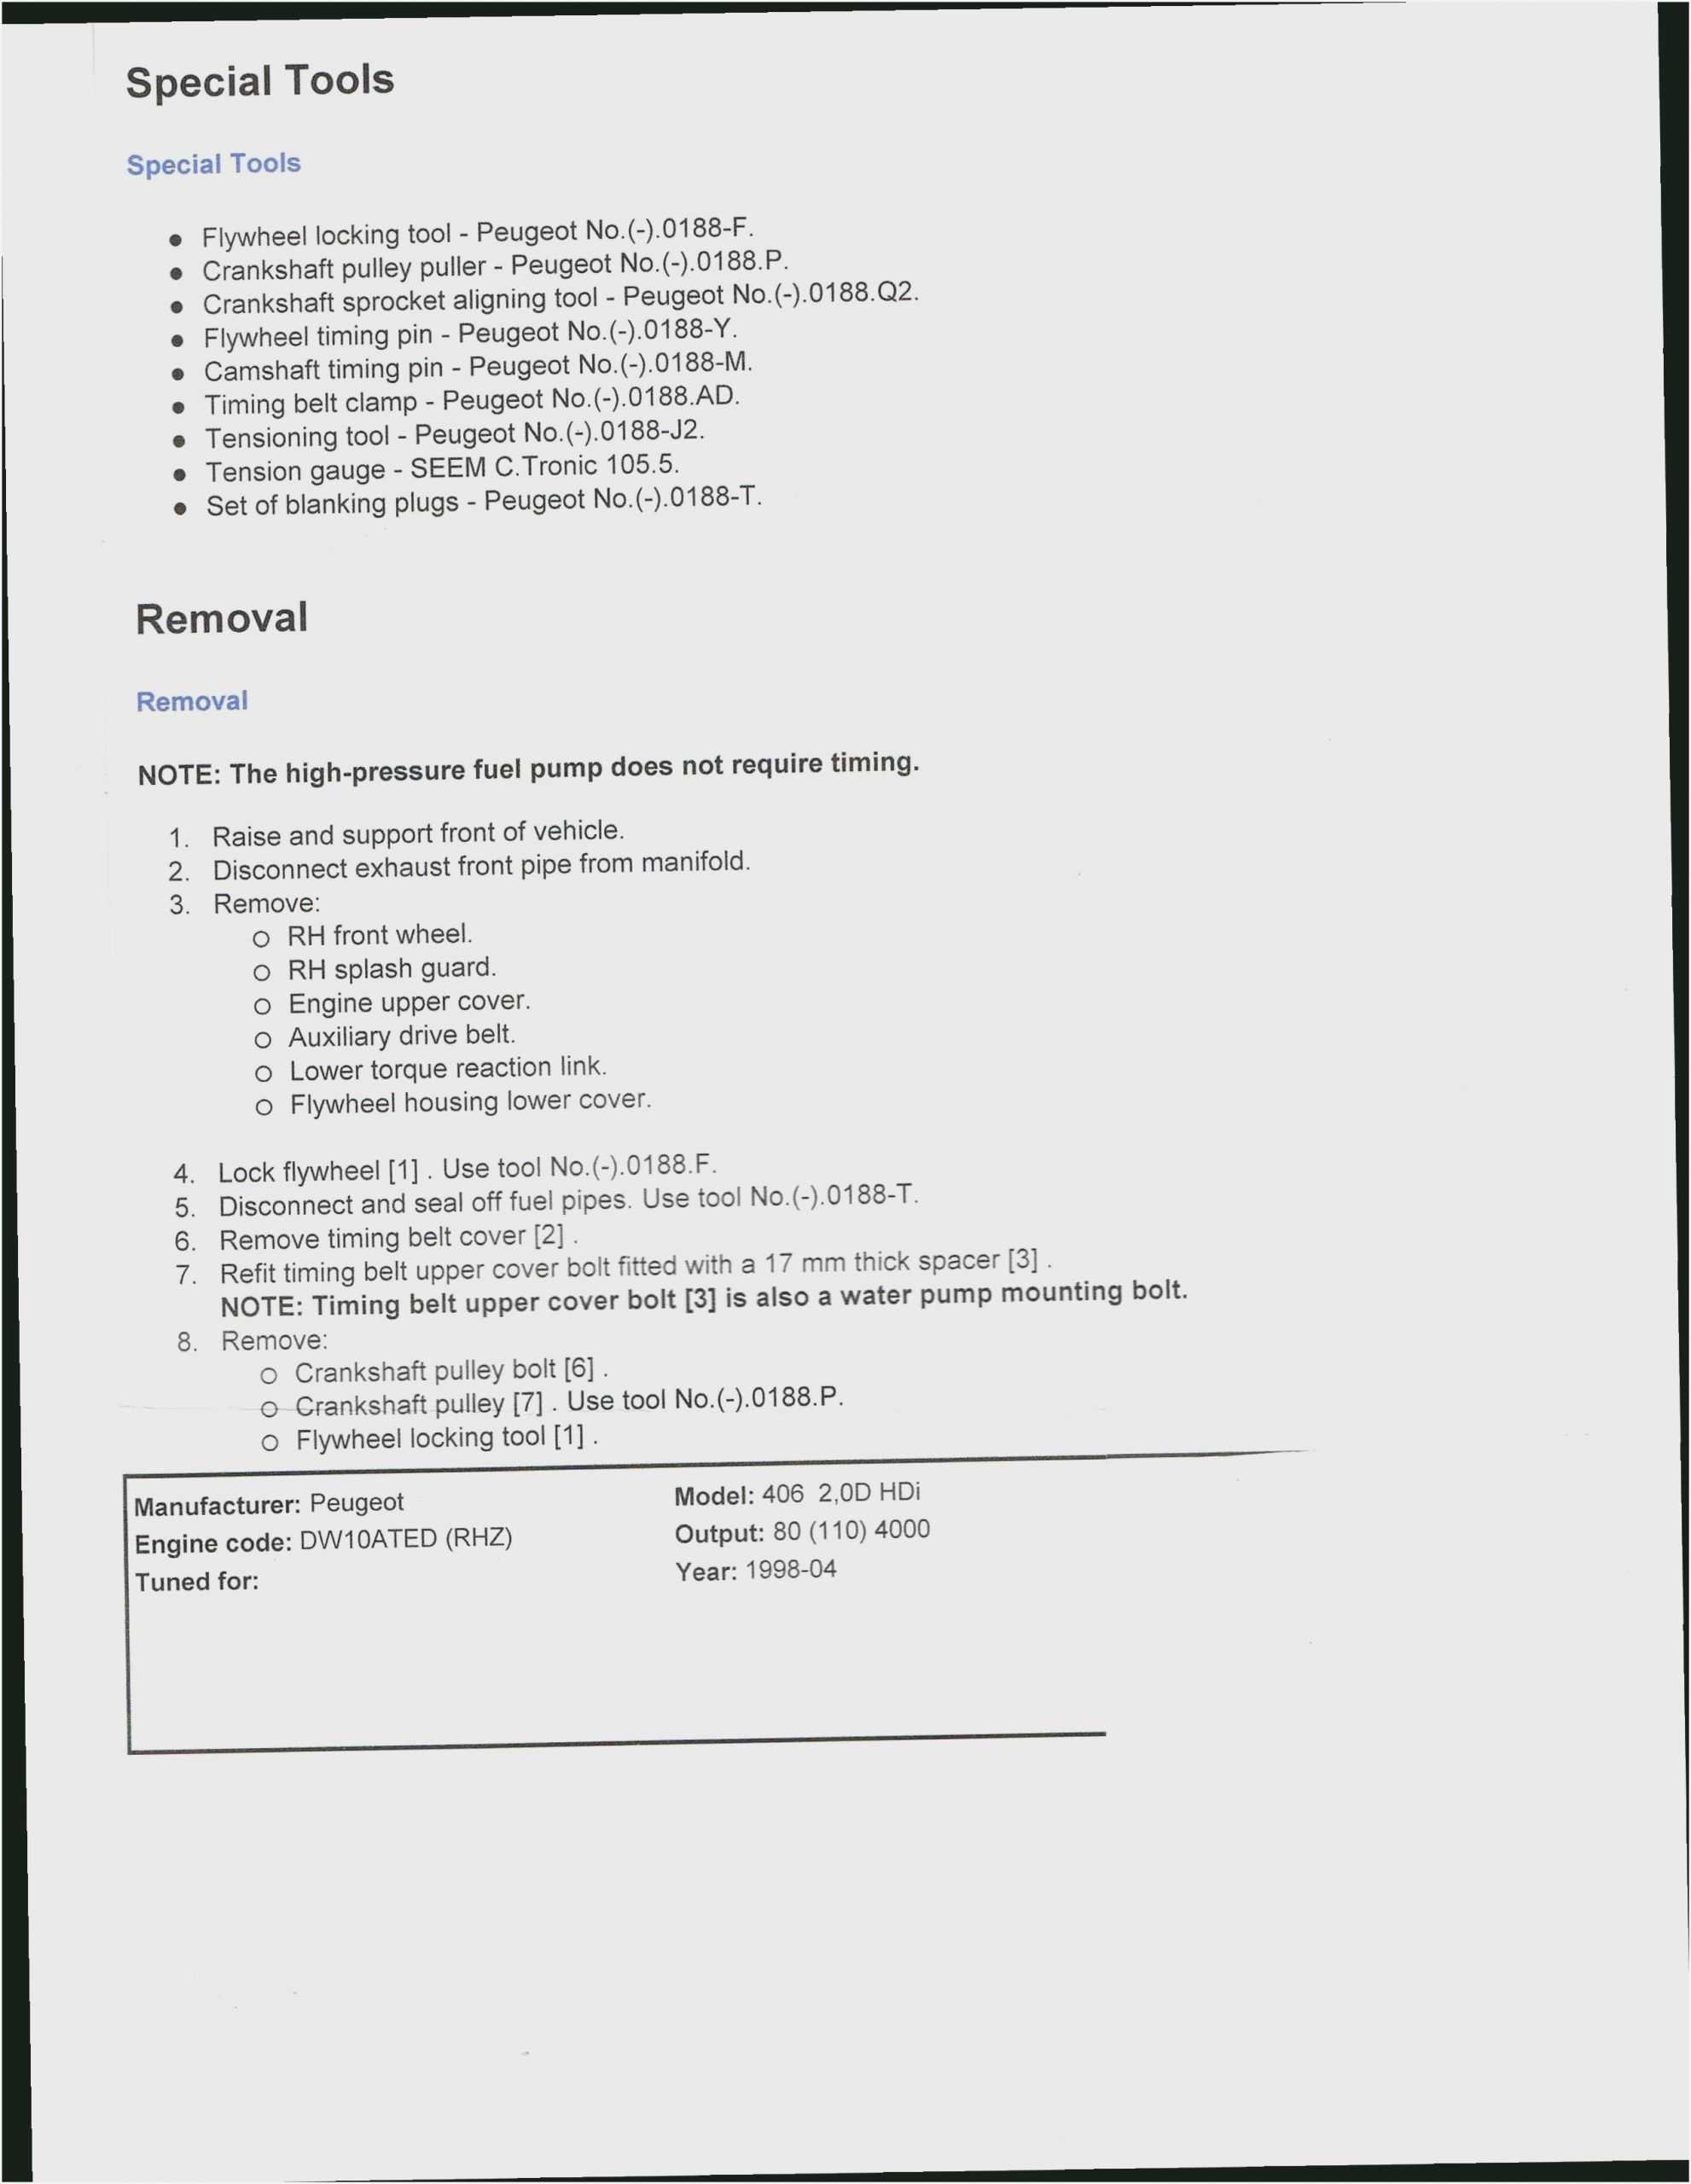 Downloadable Resume Templates For Word 2007 – Resume Pertaining To Resume Templates Word 2007